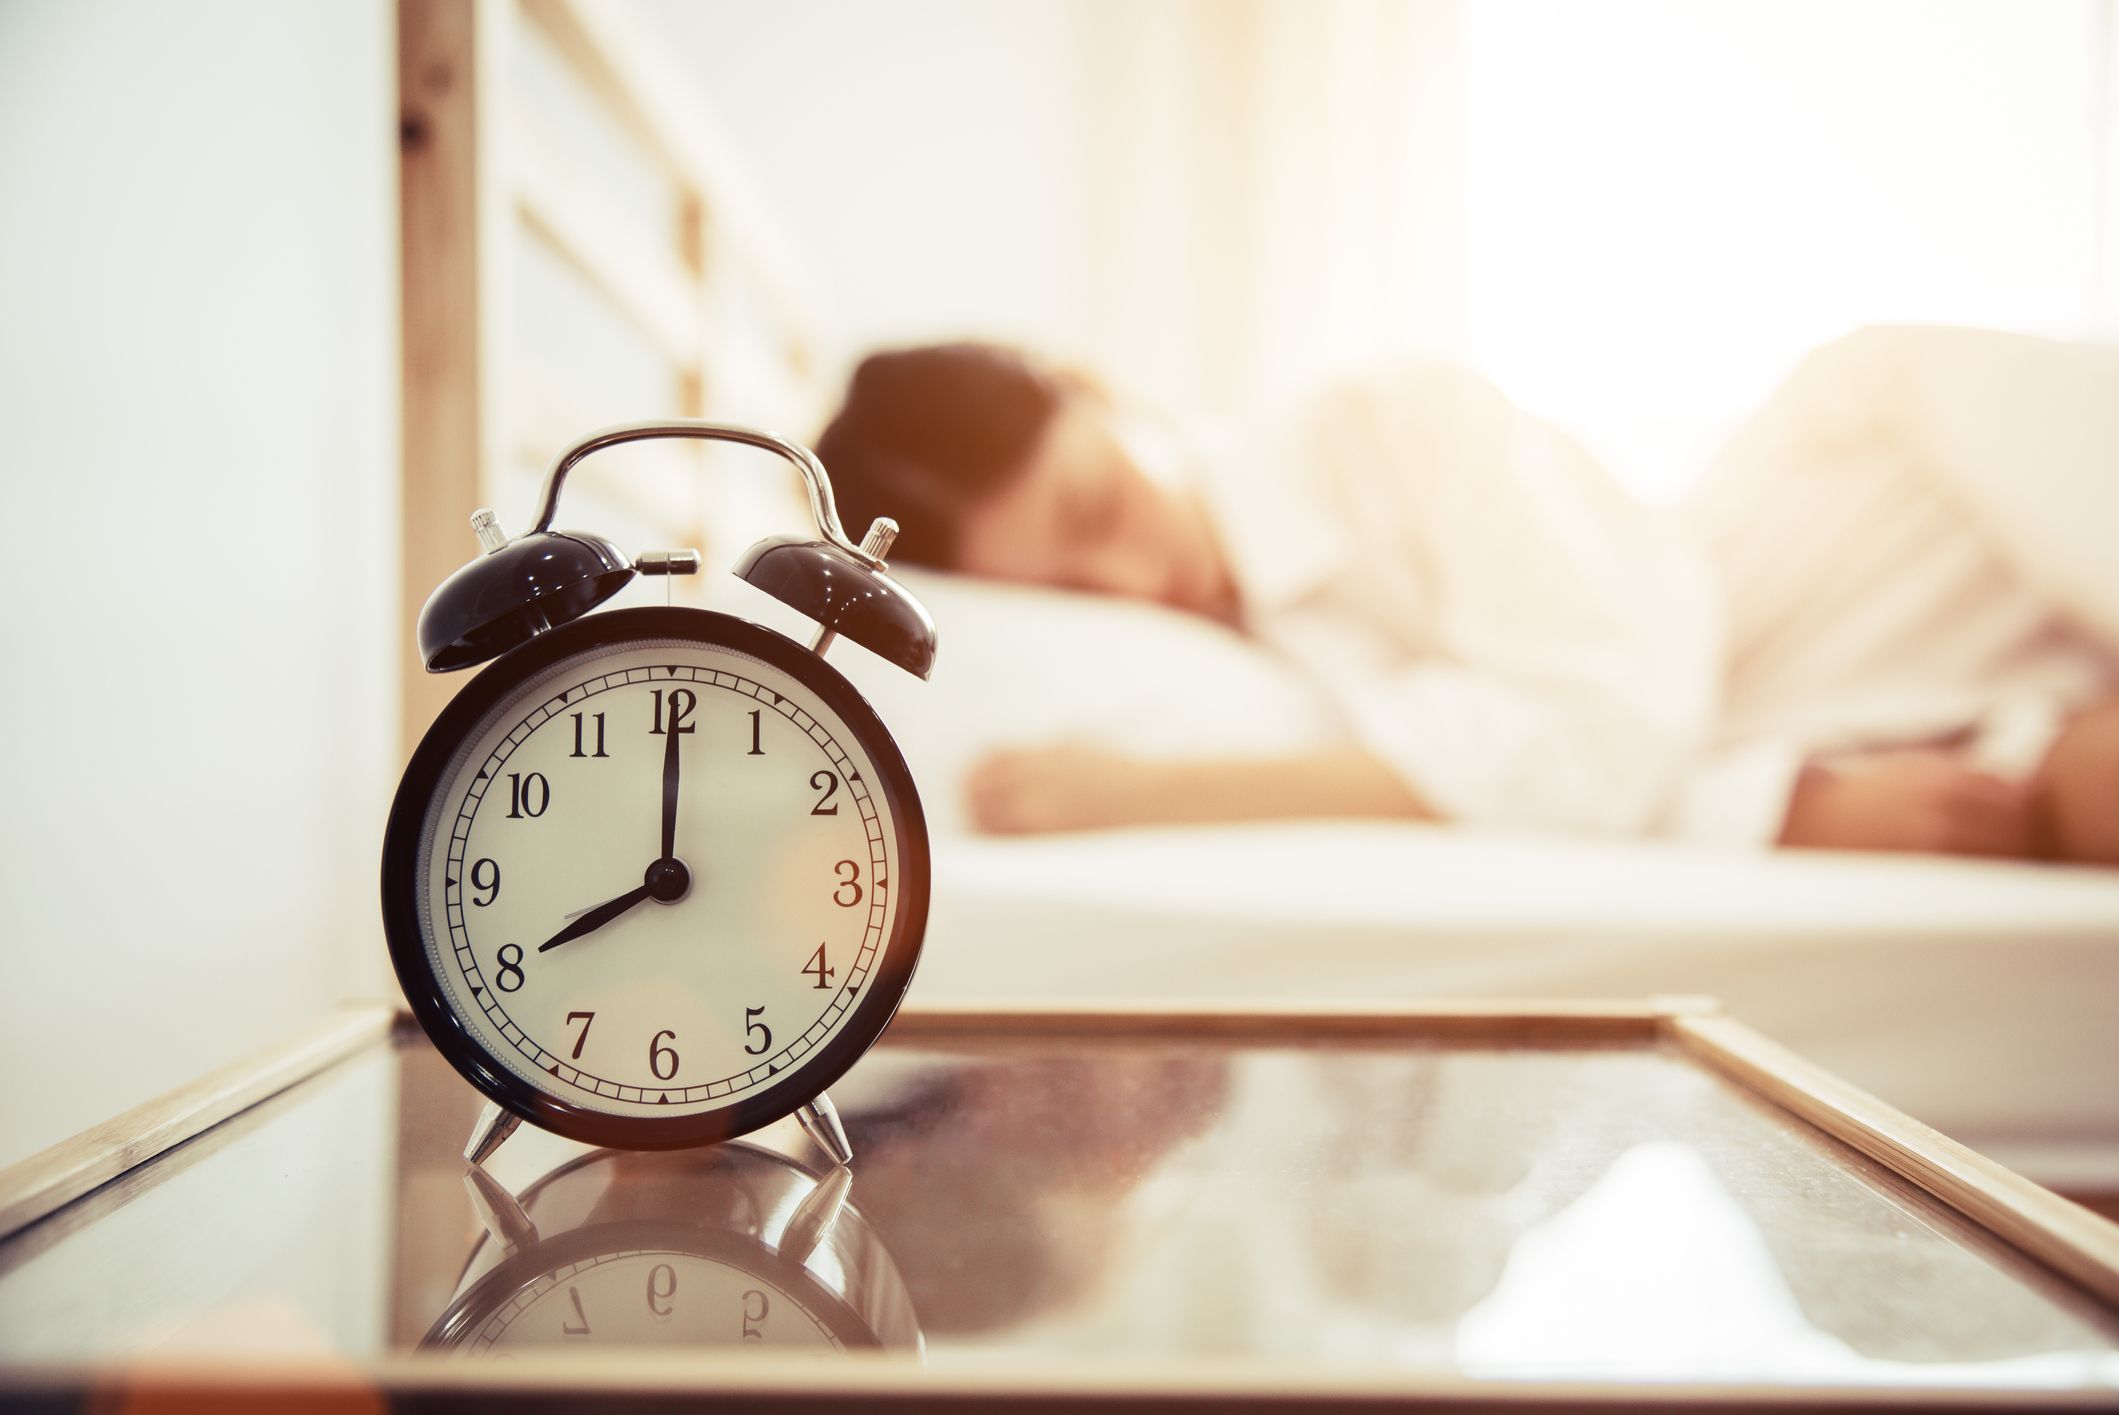 Can You Catch Up On Sleep? - Is Sleeping In Bad For You?